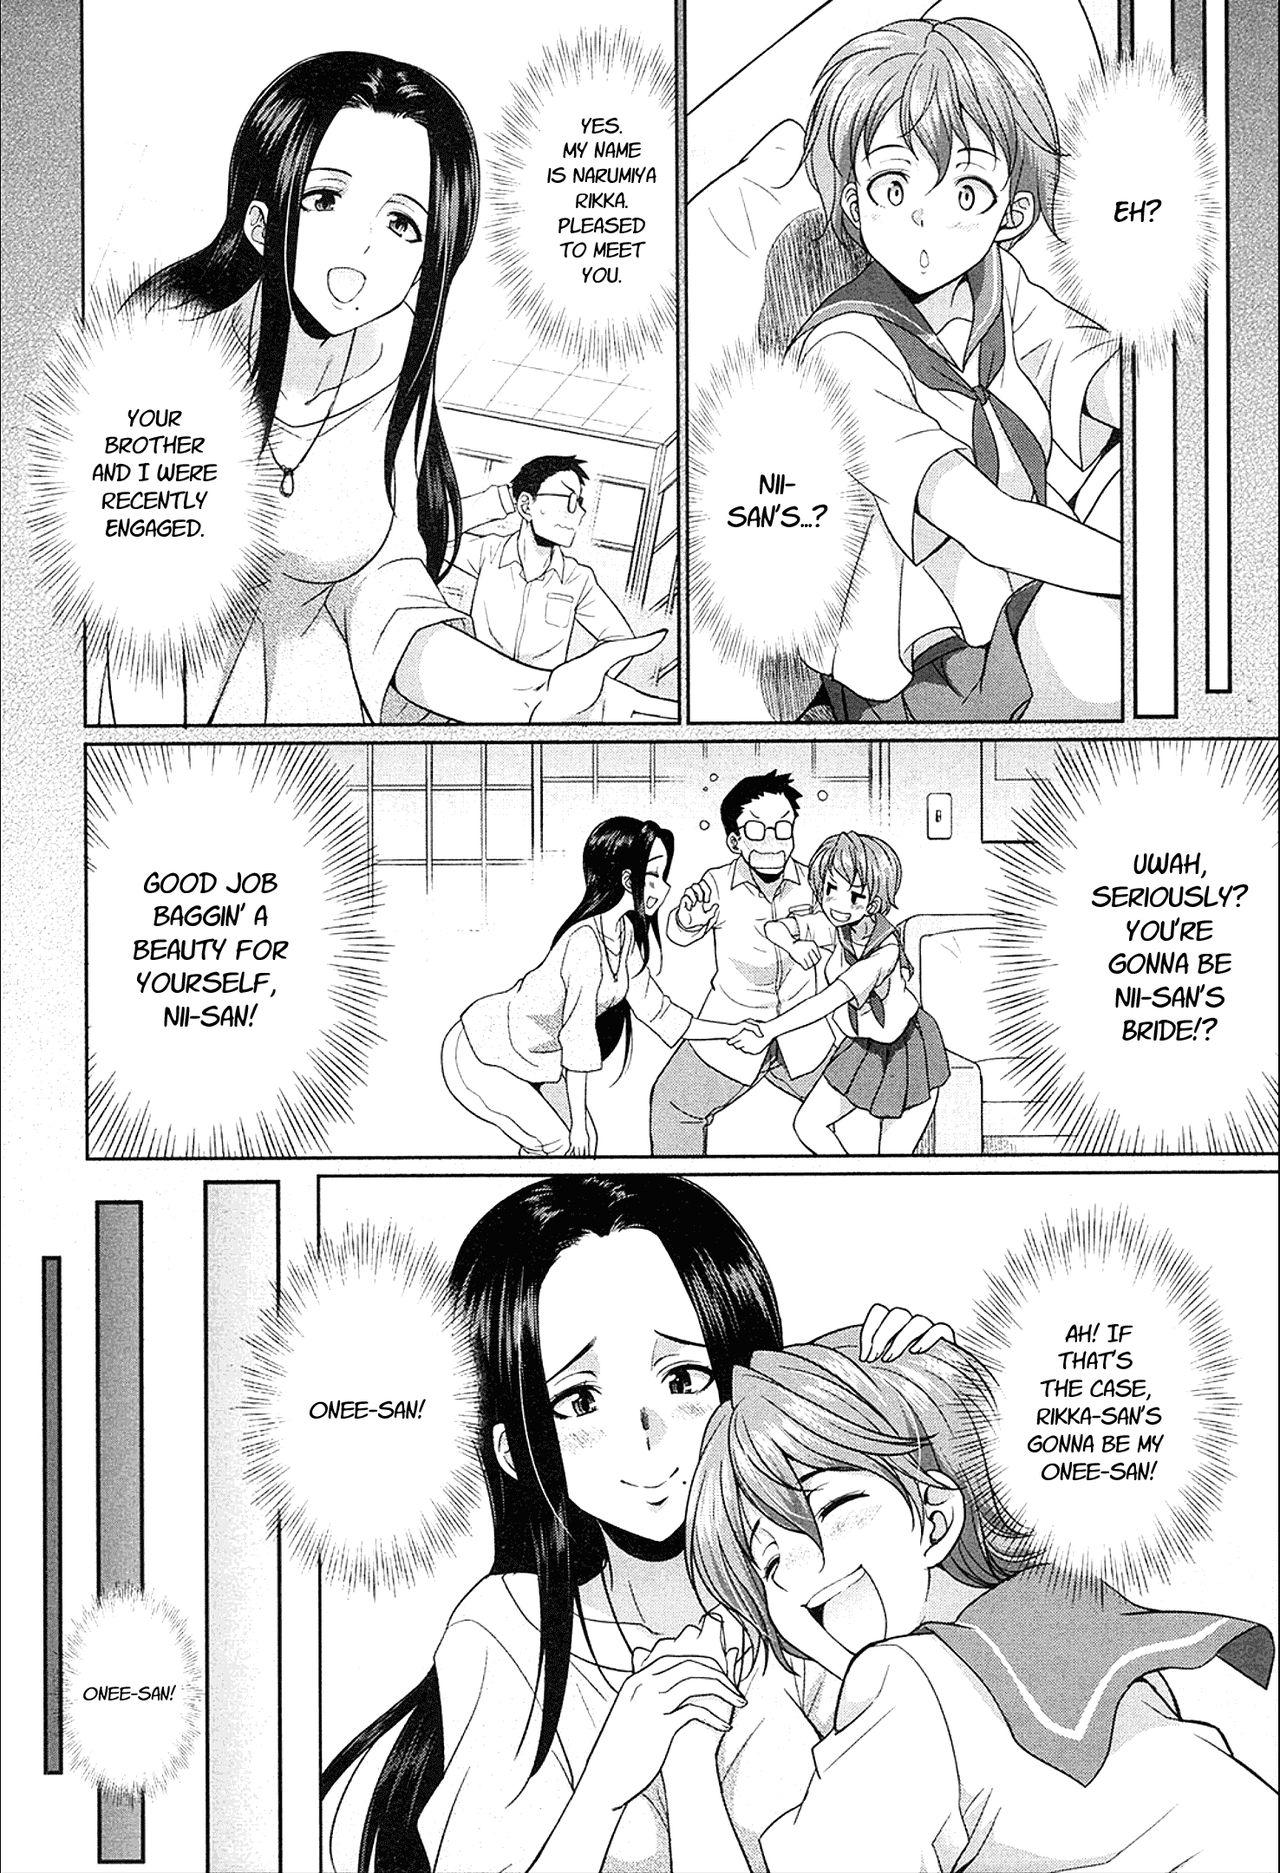 Cum Swallow Gishimai no Kankei The Relationship of the Sisters-in-Law Original Script Uncensored Vaginal - Page 4